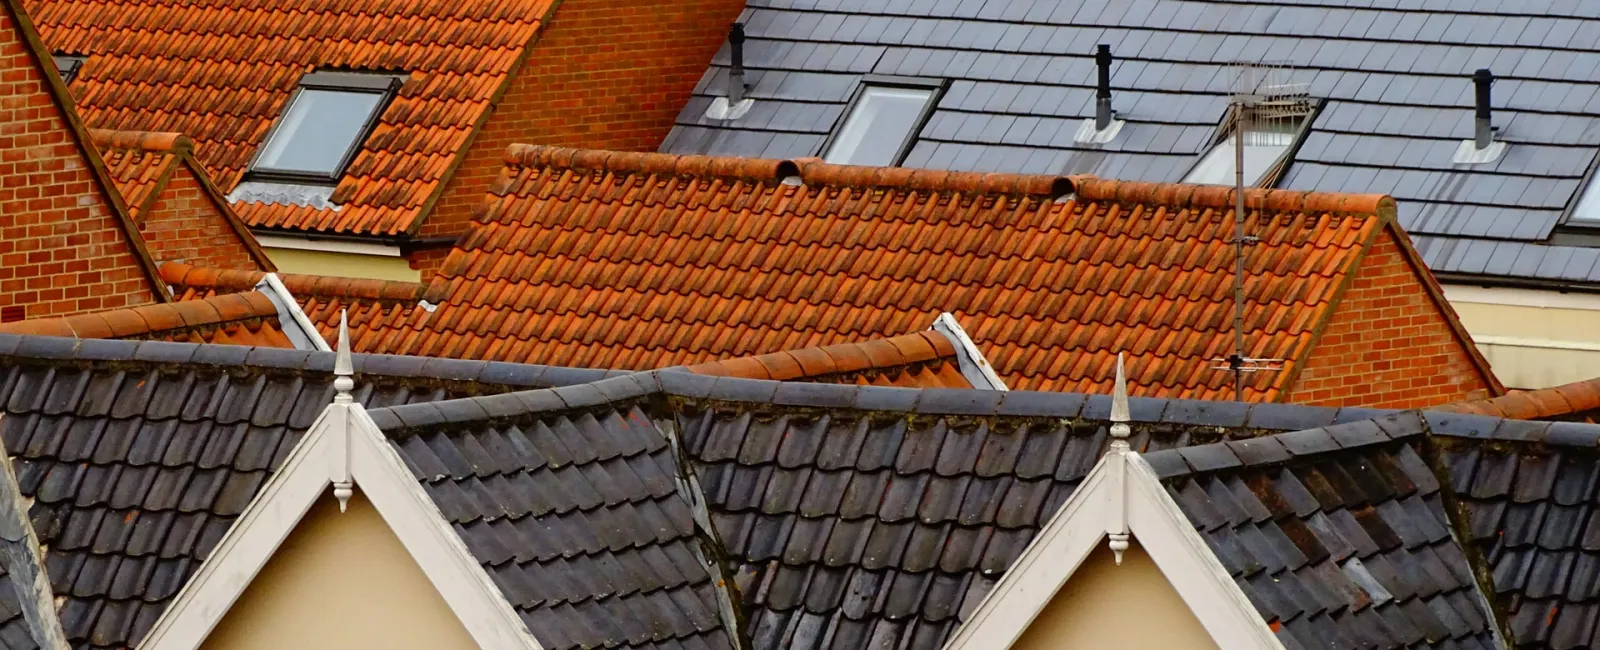 Why Are Routine Roof Inspections Important? Find Out Here!